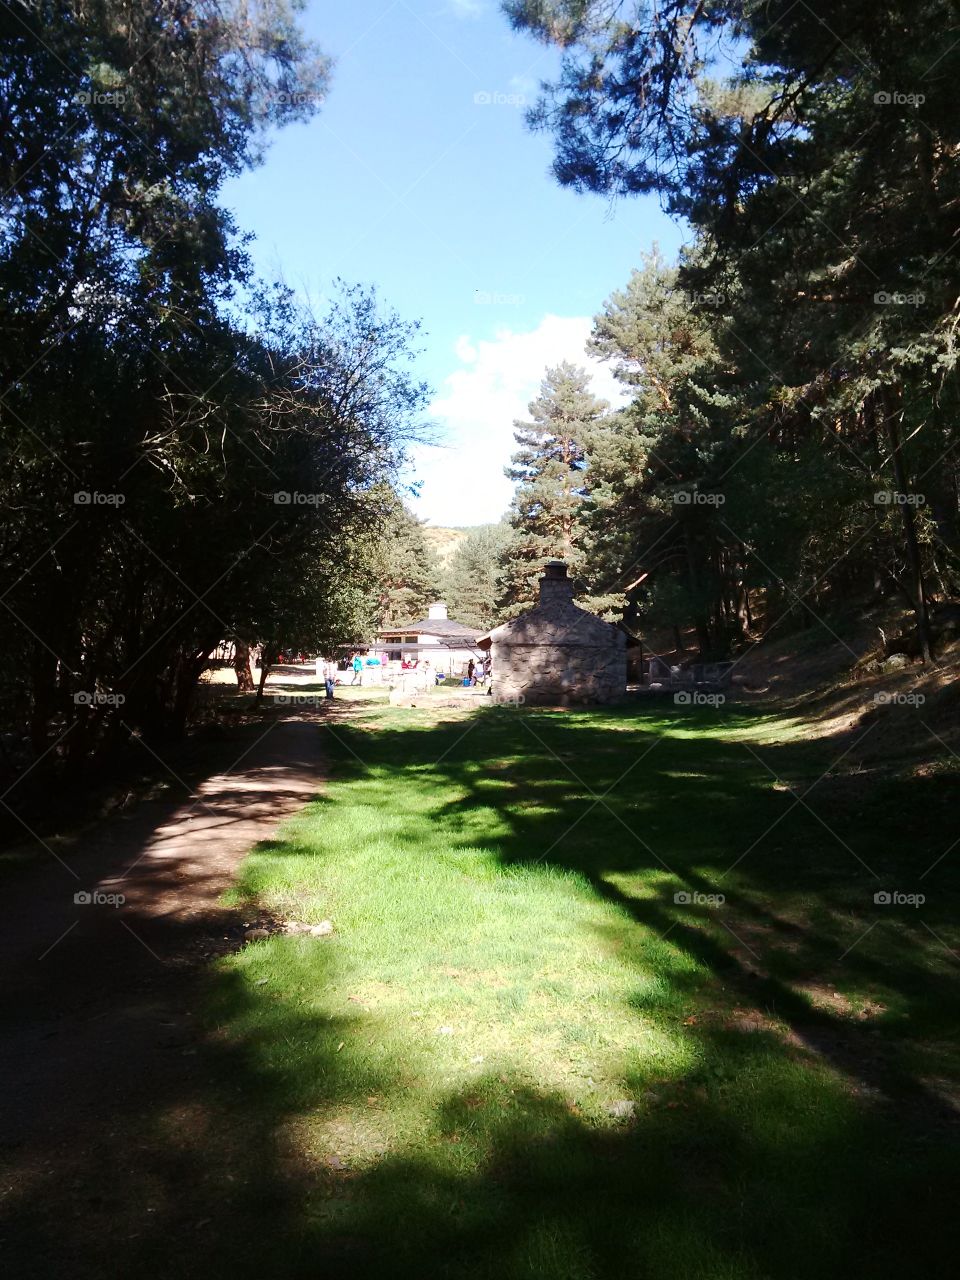 View from a distance of a picnic area inside a forest.